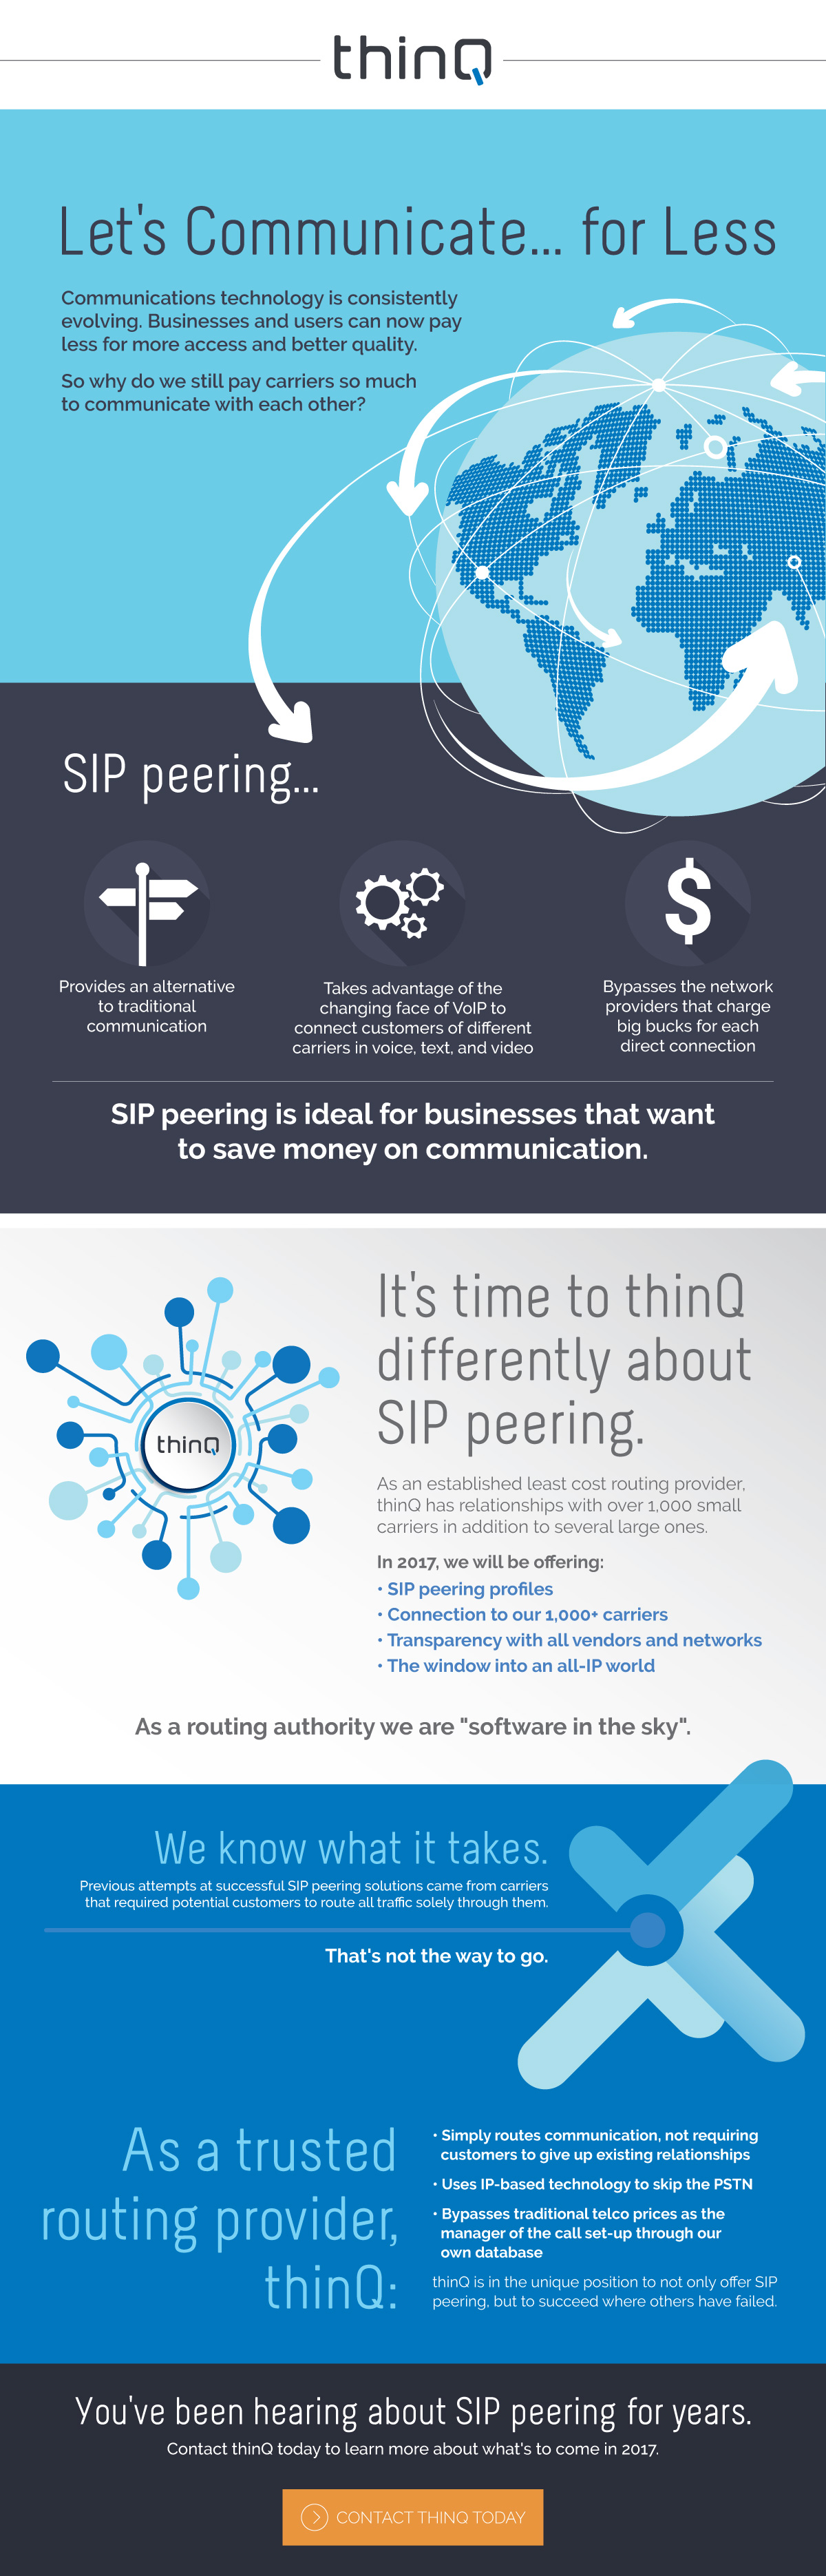 SIP peering allows us to communicate for less.